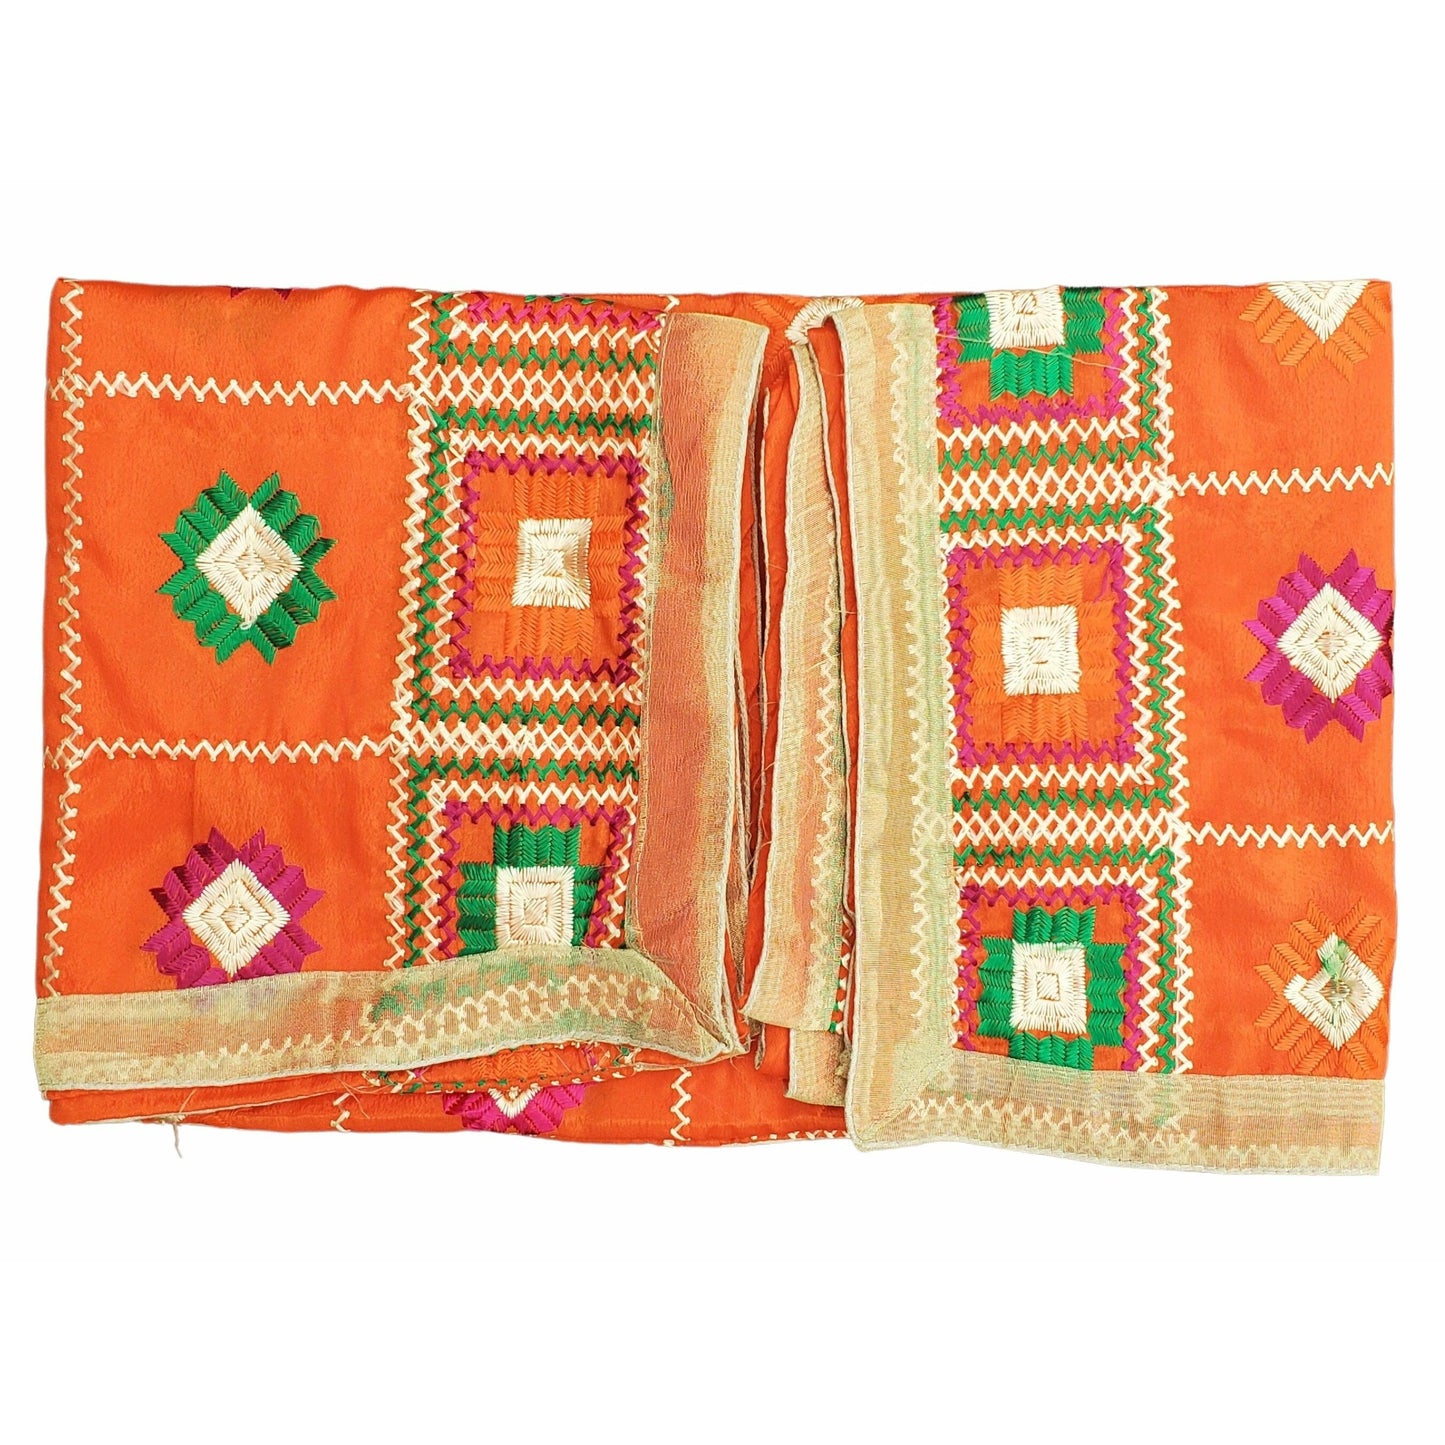 Beautiful Fulkari with Orange base and multi color flower patter + golden lace on all the borders